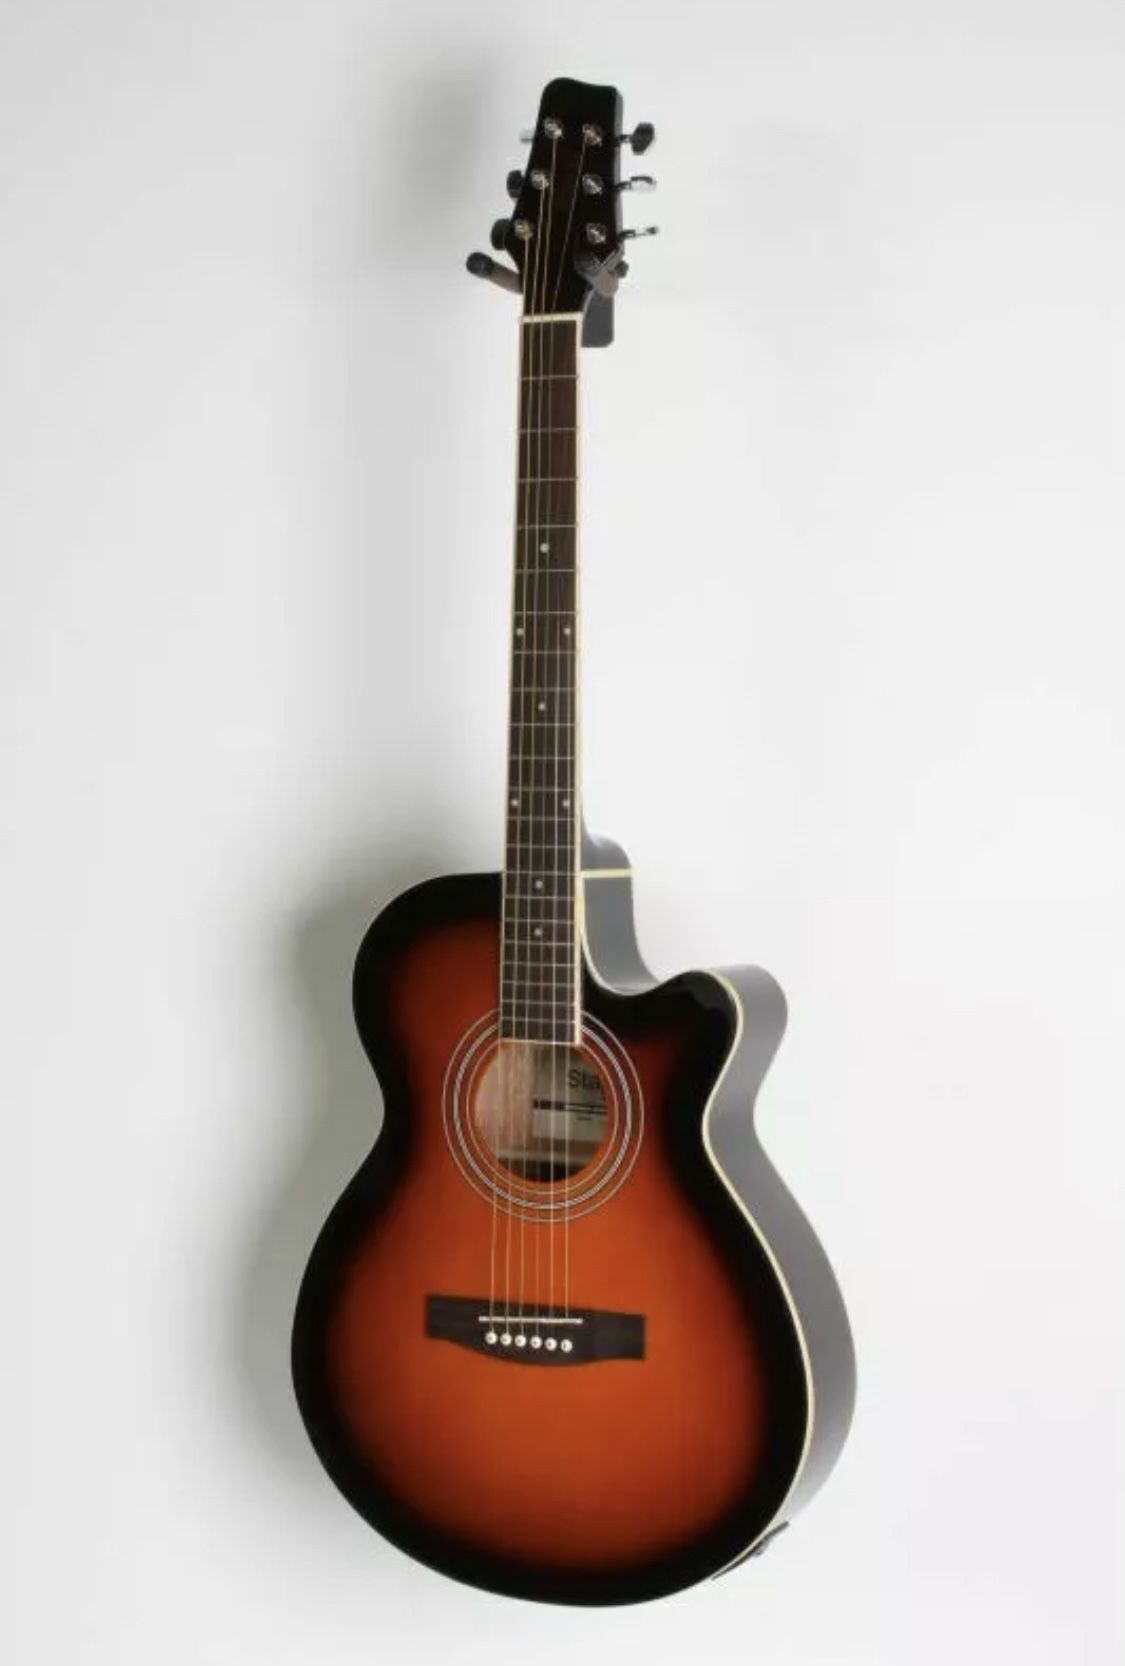 This Stagg Mini-Jumbo Electric-Acoustic Cutaway Concert Guitar is a great choice for the aspiring guitarist. The convenient cutaway gives you better